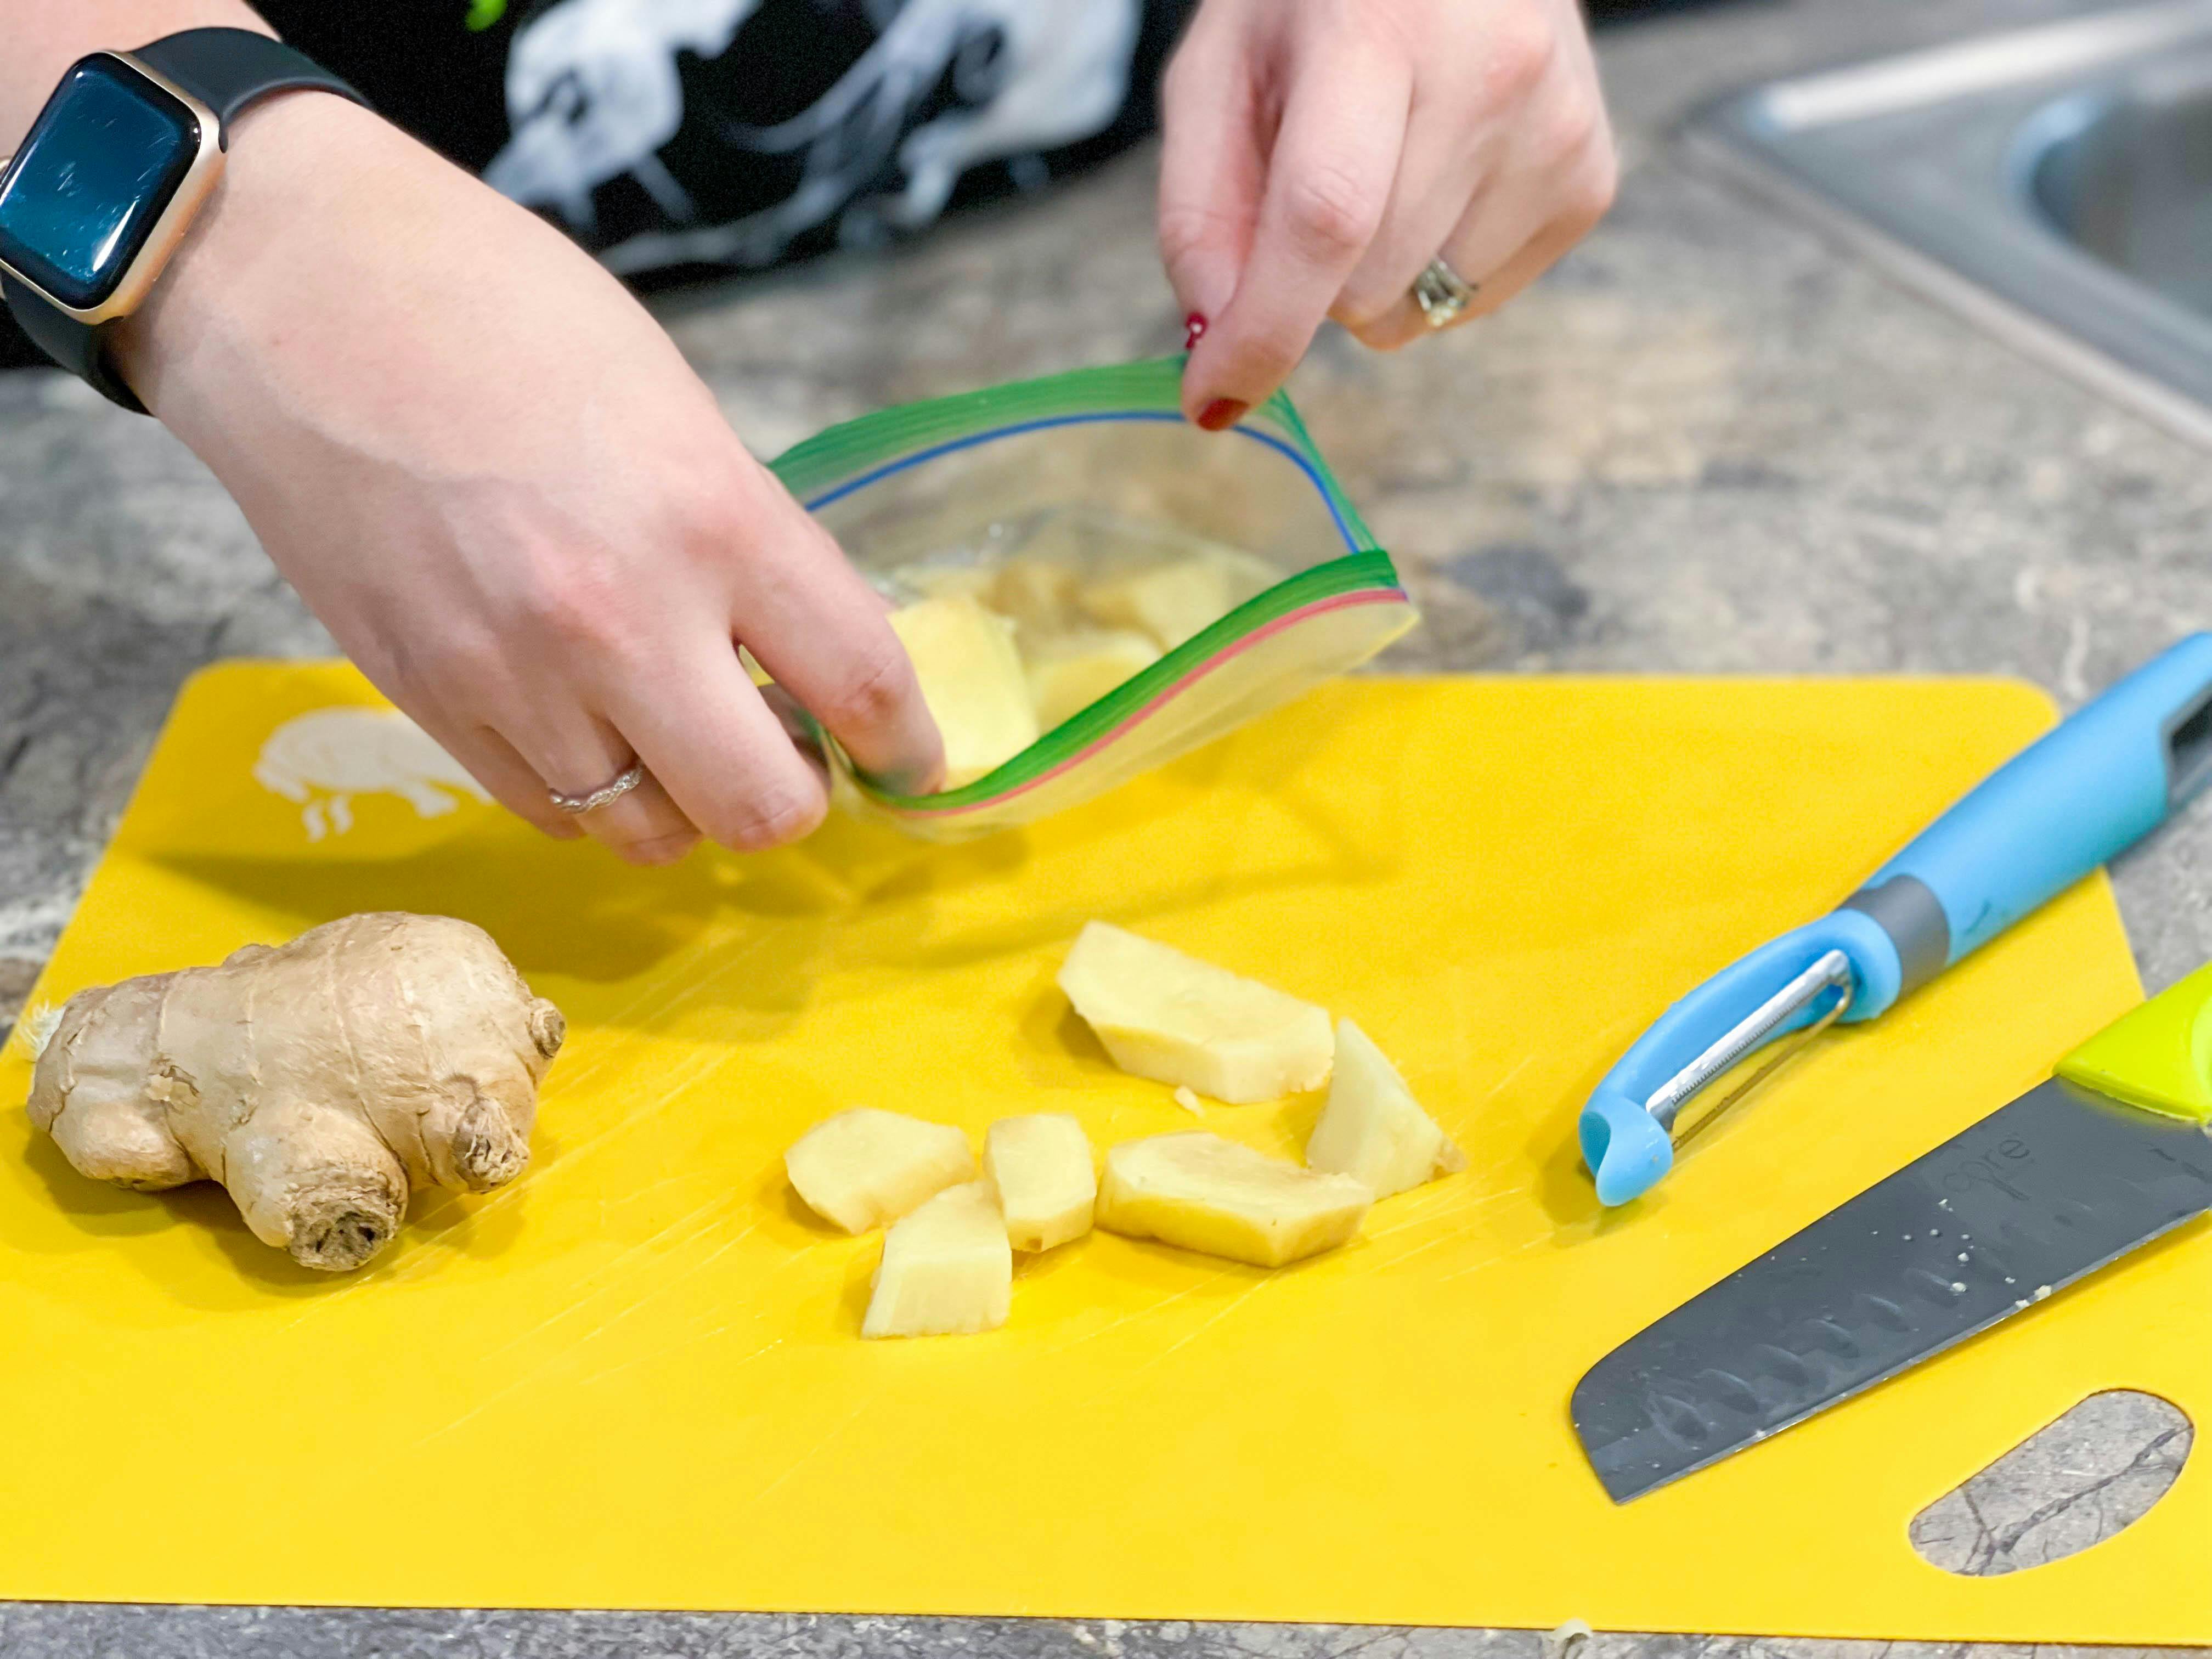 ginger peeled and cut being put in plastic bag